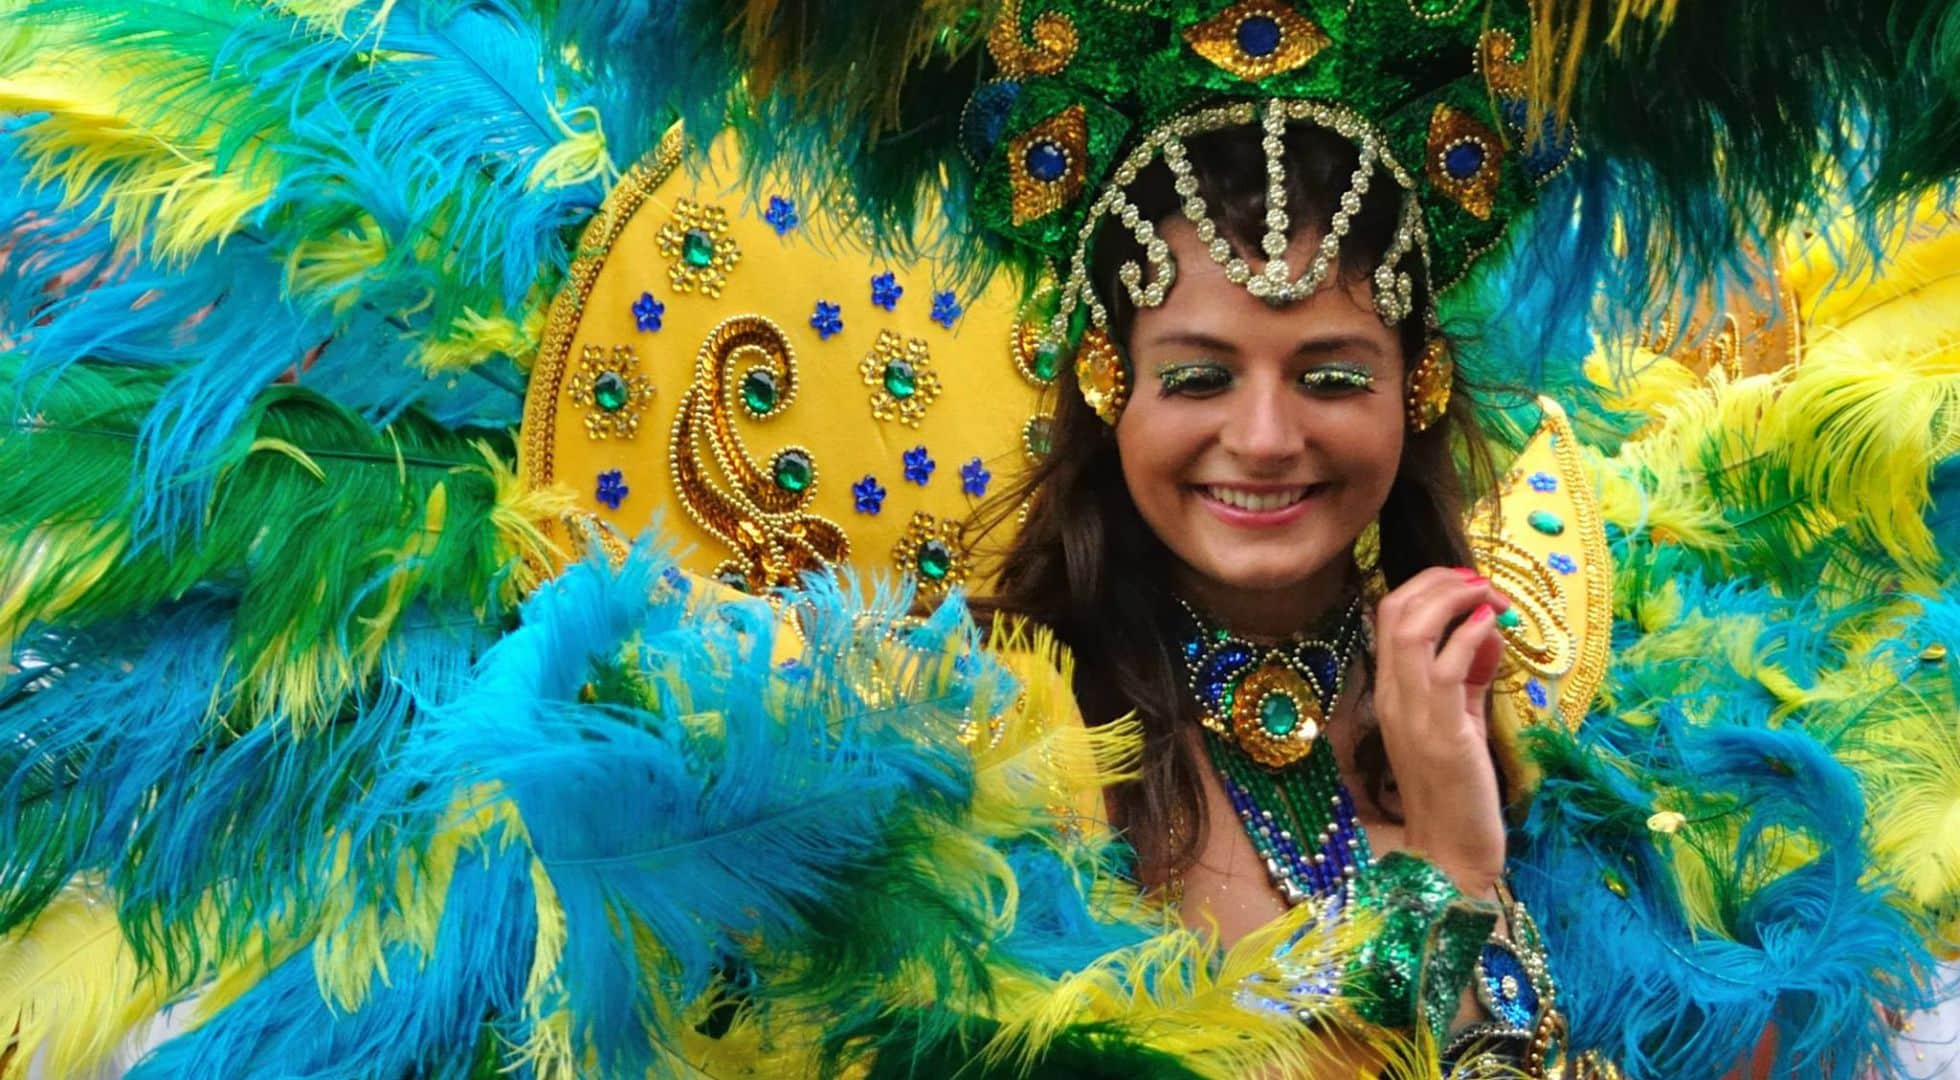 Despite what some may say, the Rio Carnival is kid friendly.